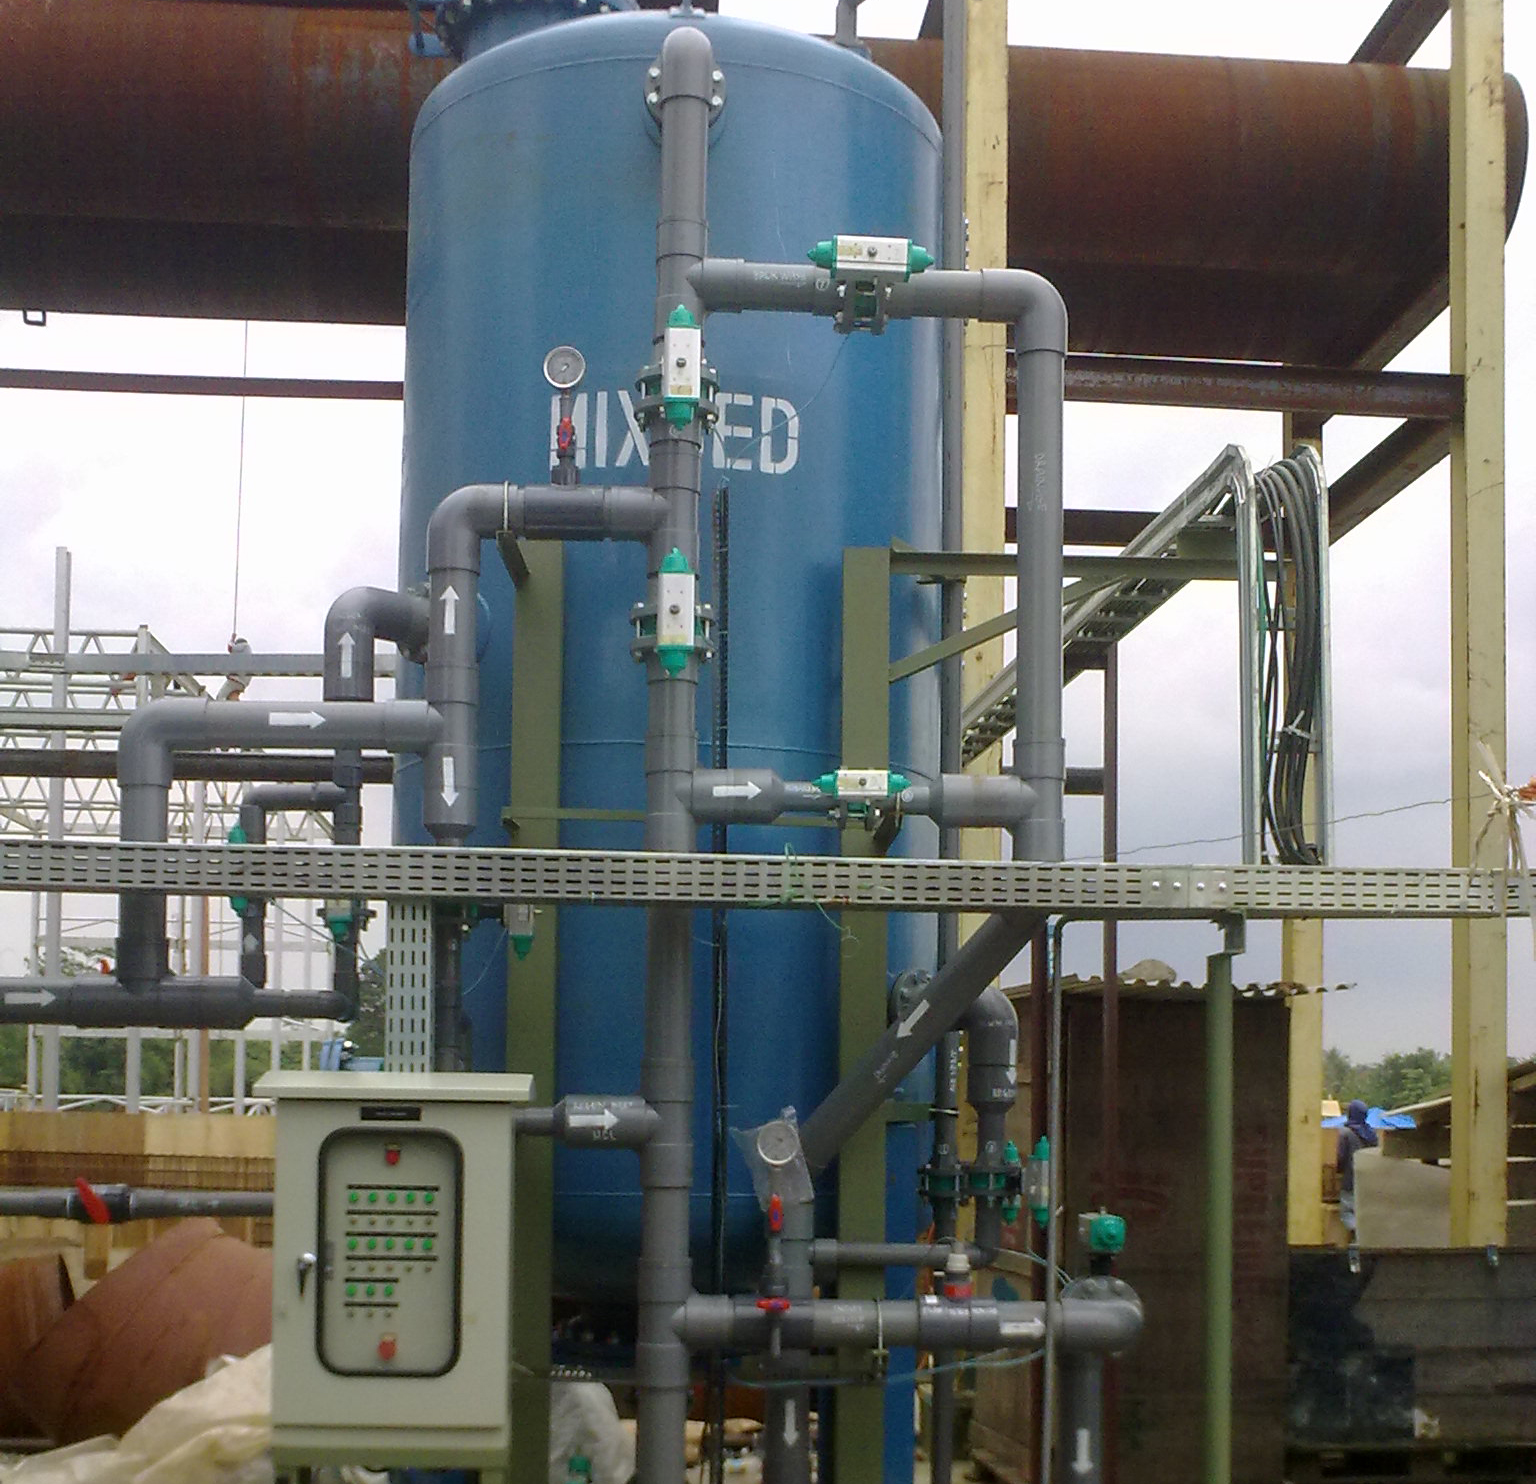 Mix Bed & Reverse Osmosis